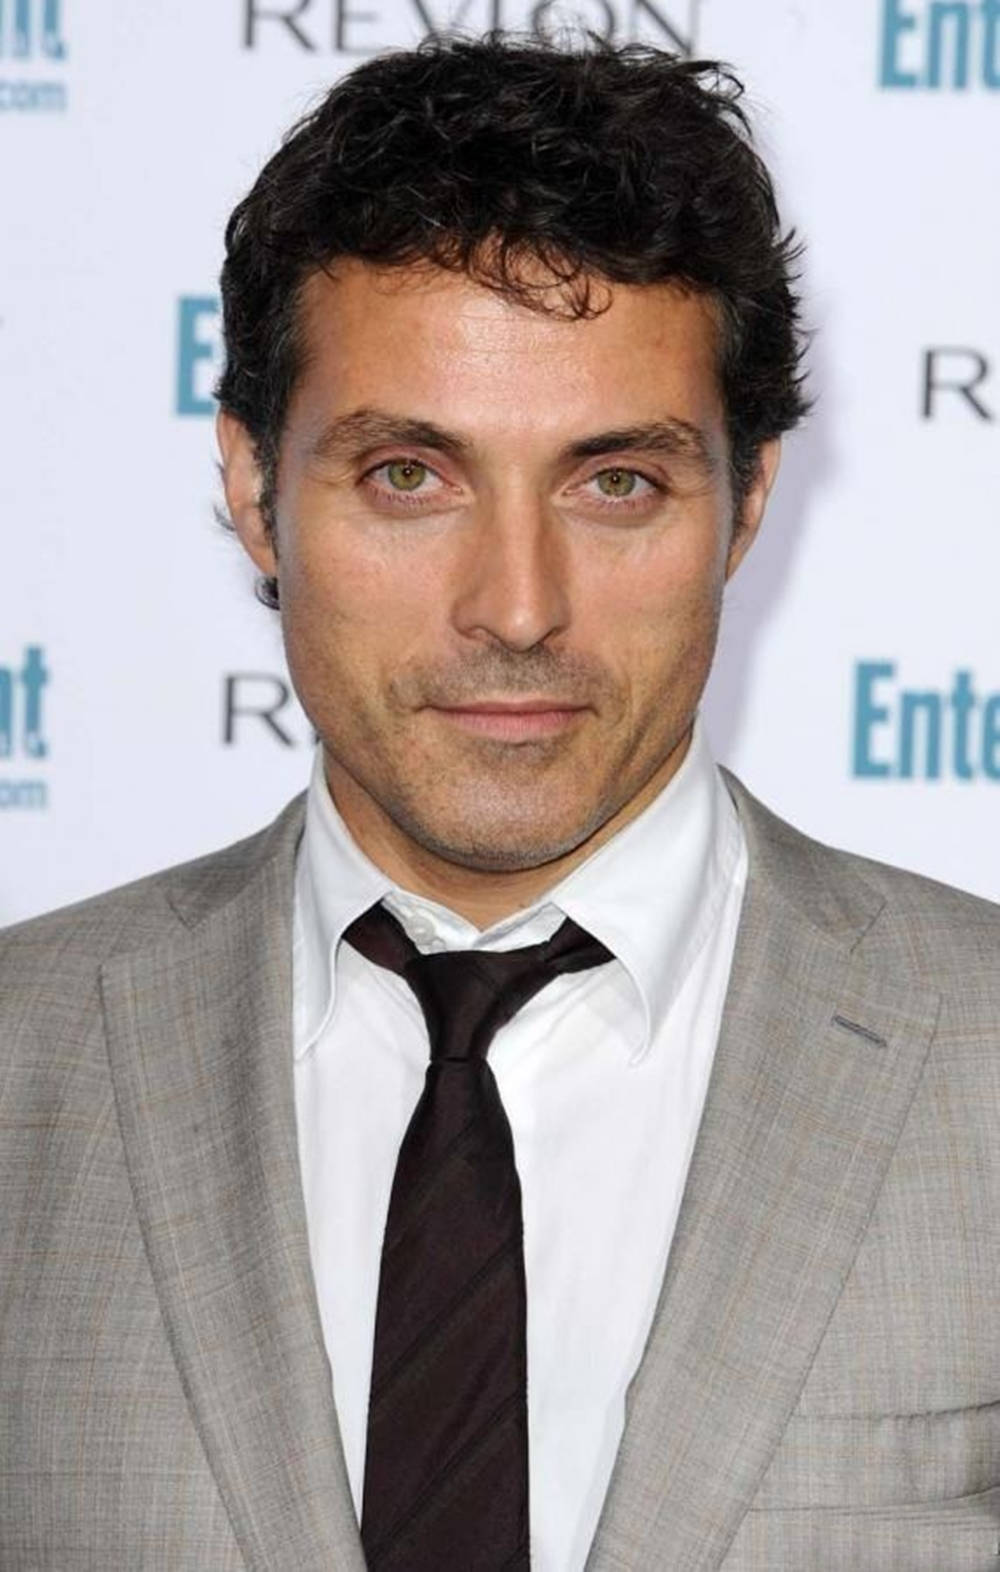 Caption: Elegant Rufus Sewell in a Gray Suit and Black Tie. Wallpaper